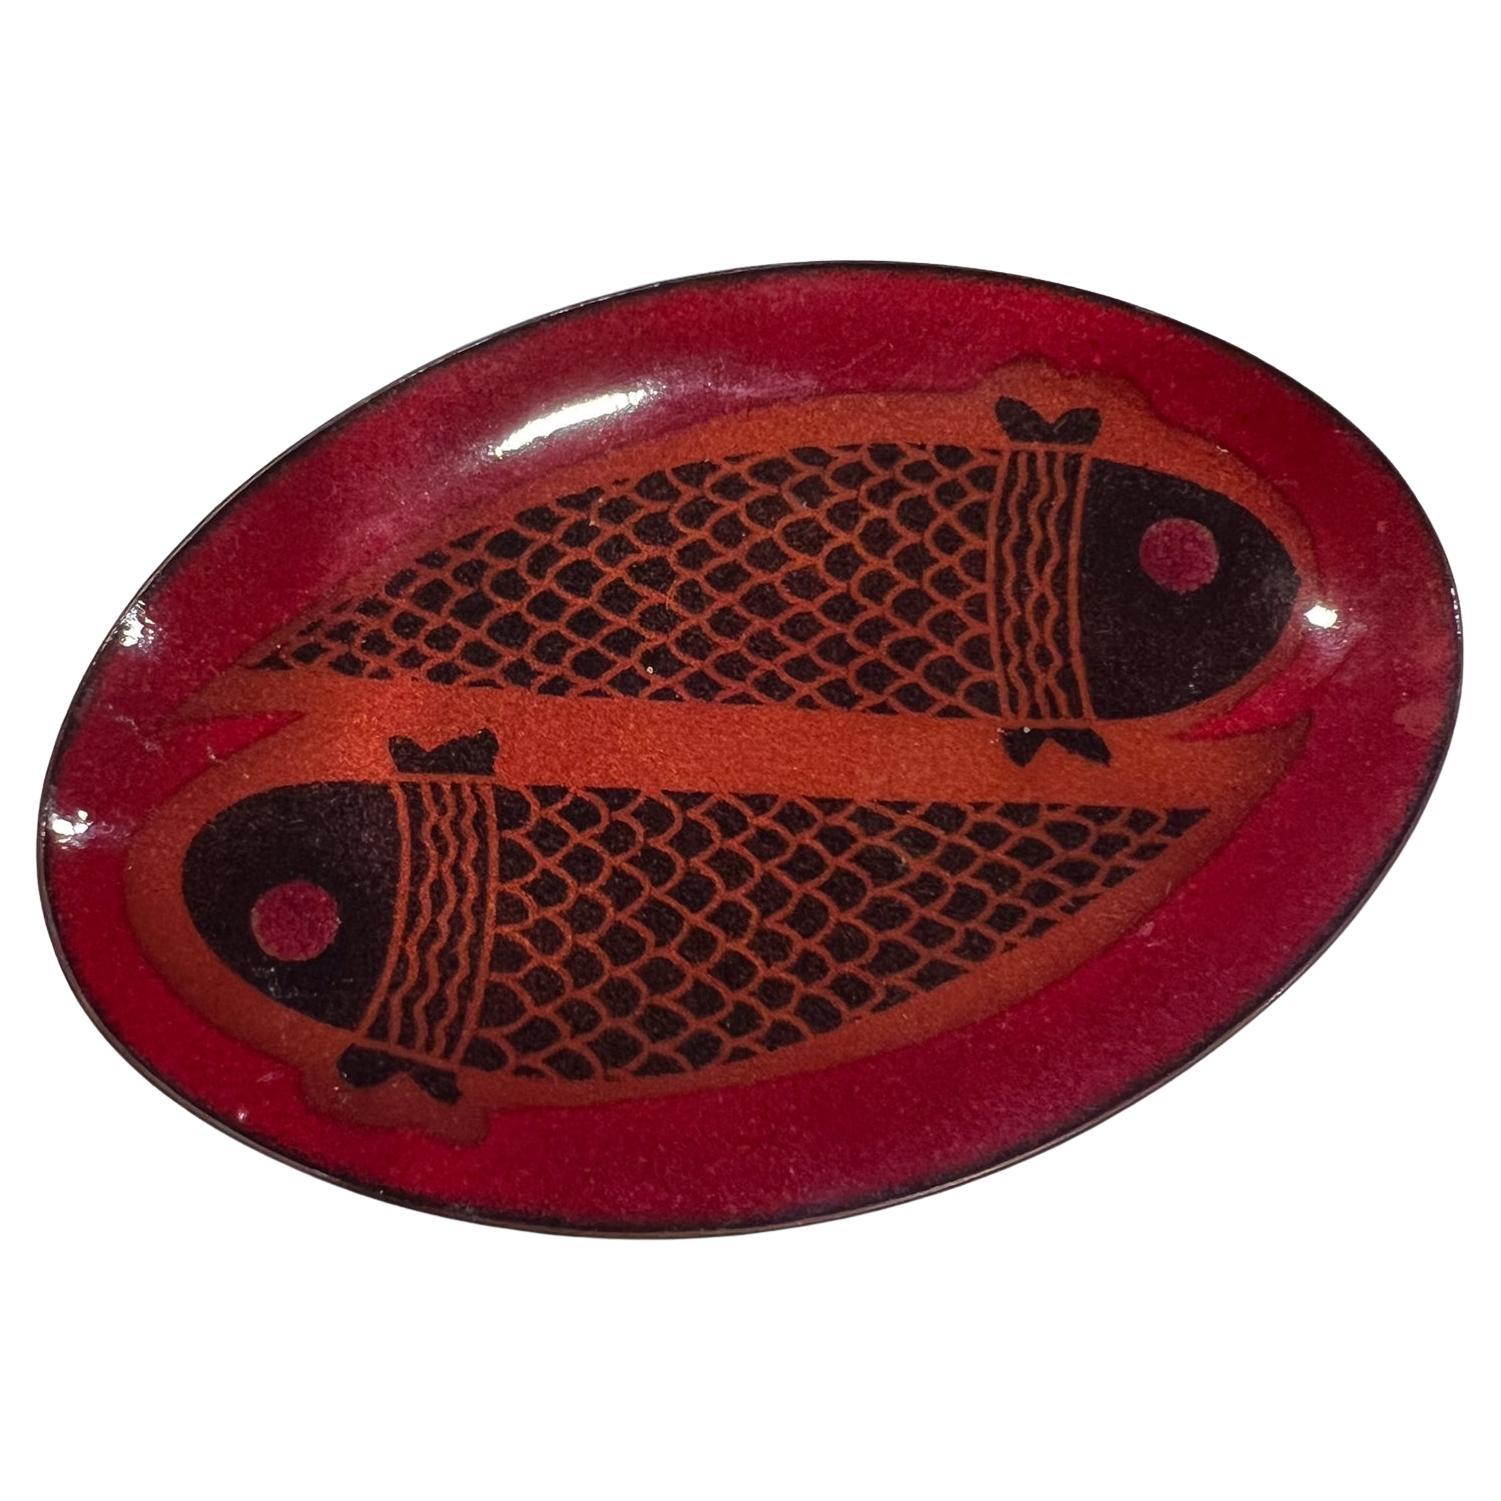 1960s Miguel Pineda Enamel on Copper Oval Fish Plate
Los Castillo Maggie Howe Studio Art Cuernavaca Mexico
Signed Miguel Pineda
4.75 w x 3.18 d x .63 h
Preowned vintage unrestored condition, please see images provided.